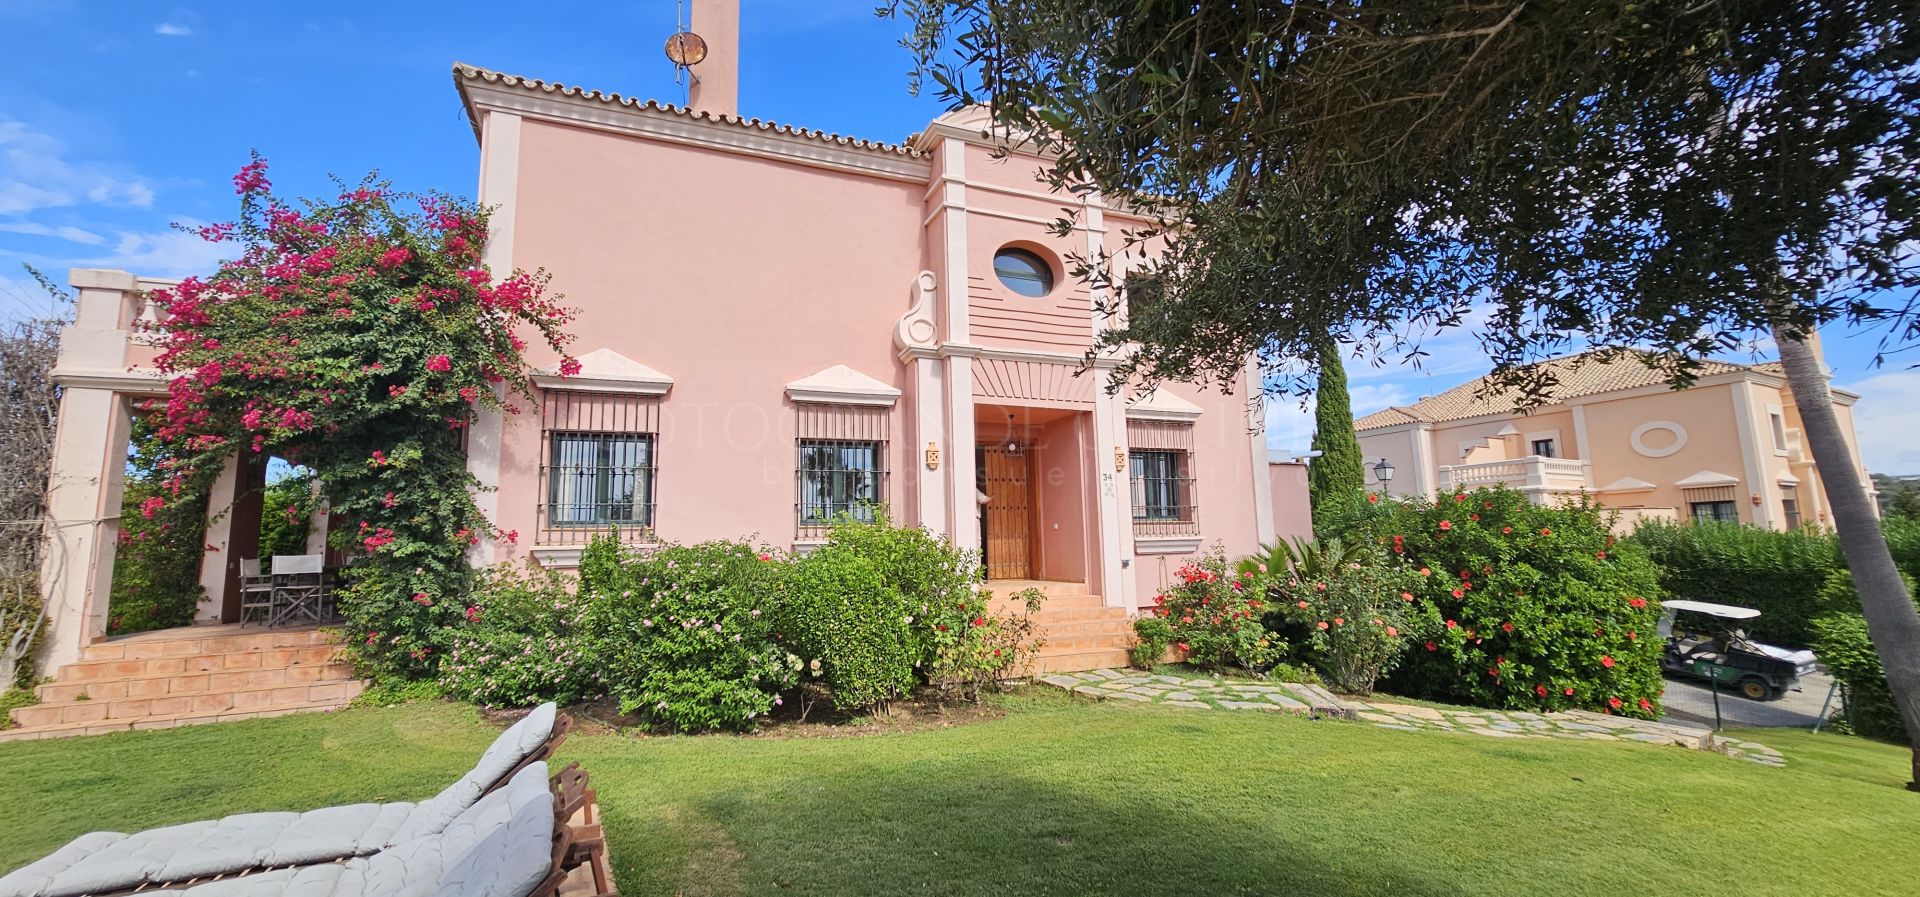 Exceptional semi-detached house with panoramic views, located in Sotogolf